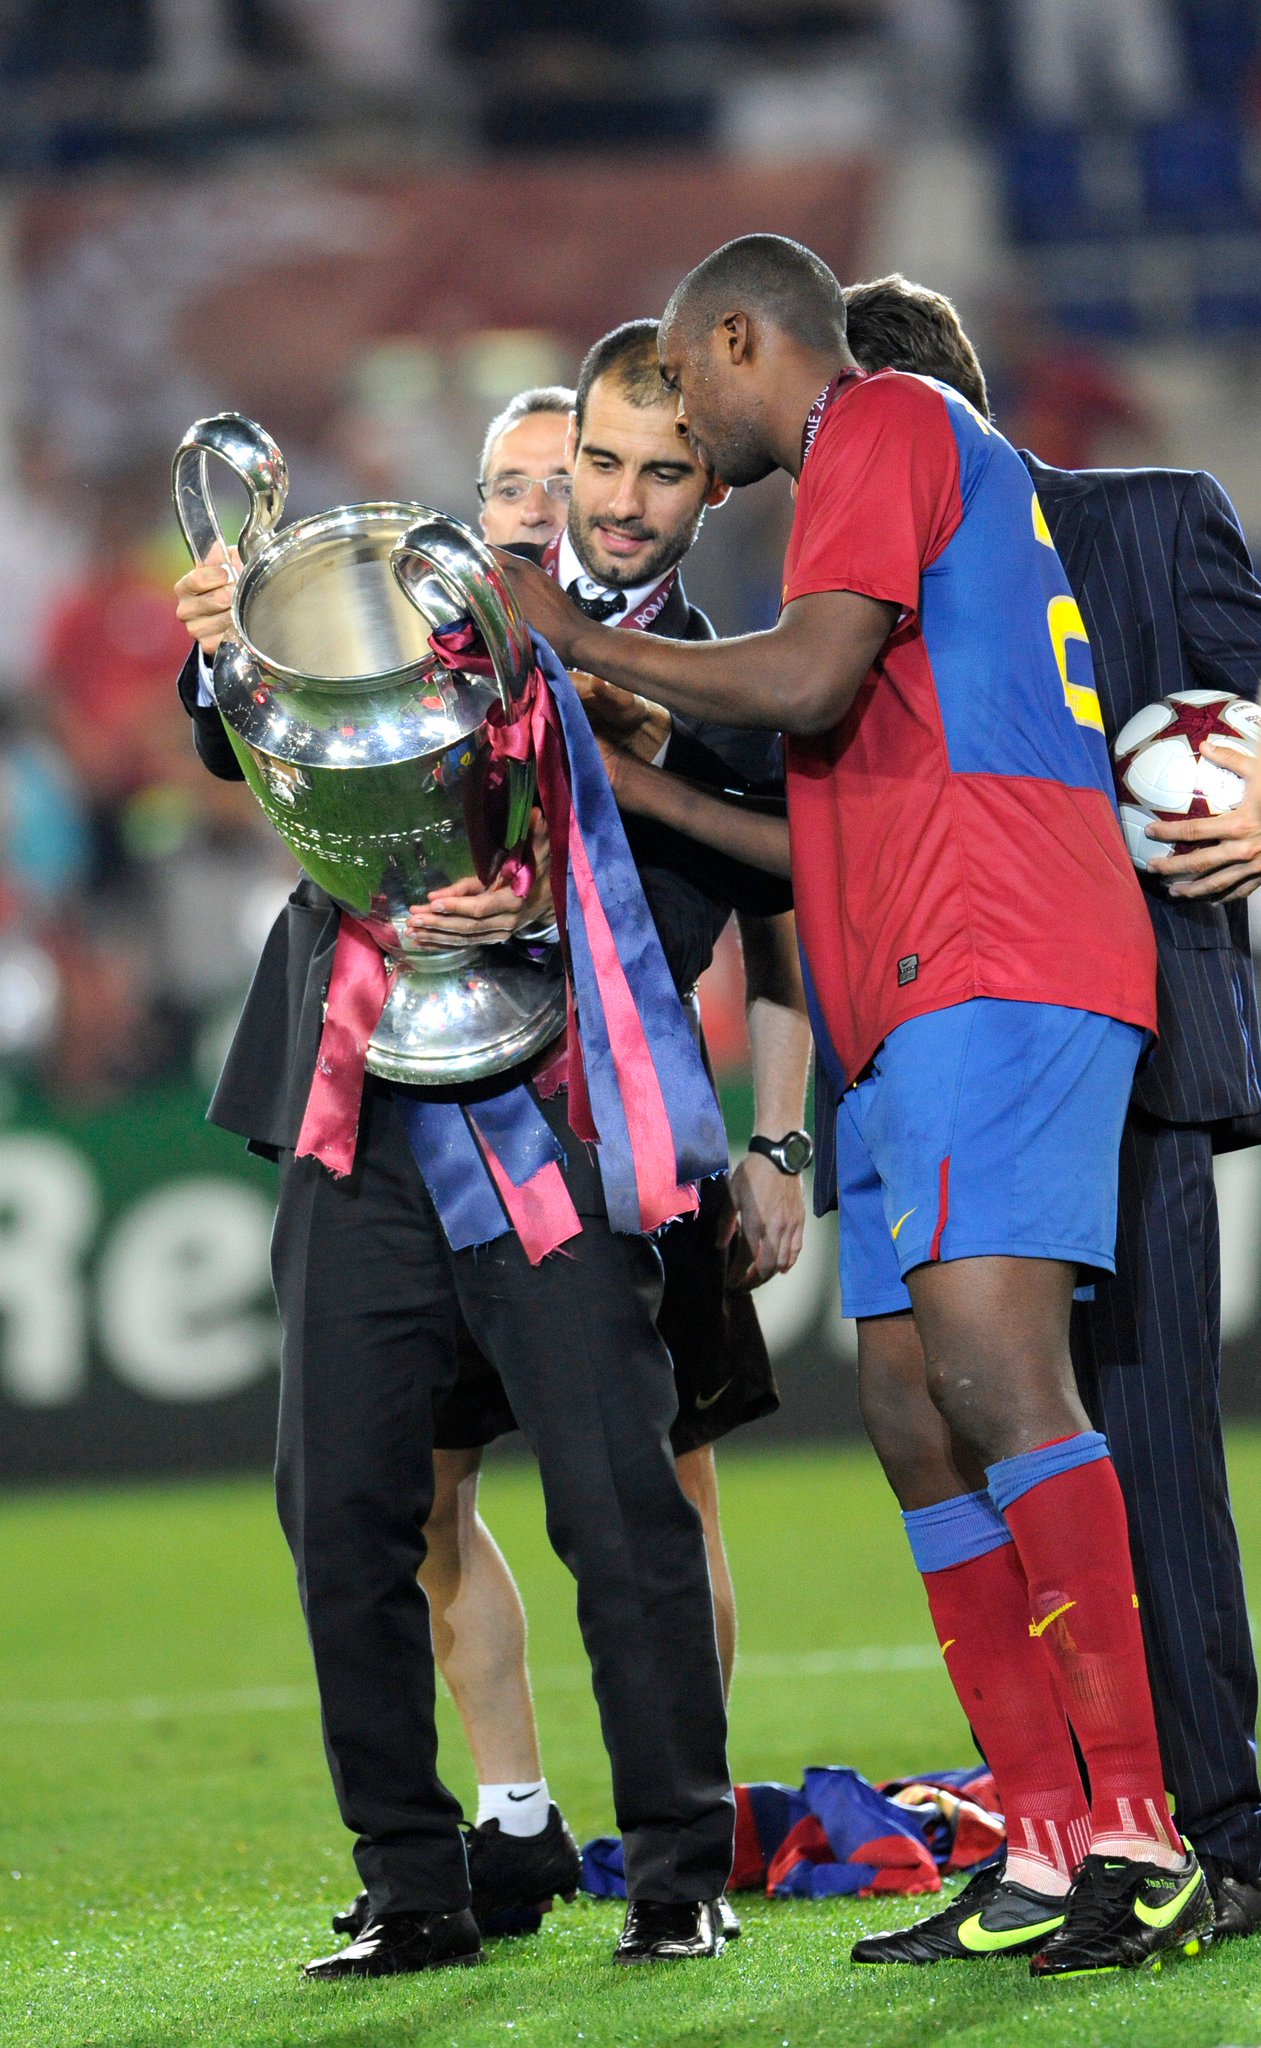 Happy 34th birthday to Yaya Touré, a winner with Barcelona in 2009! 